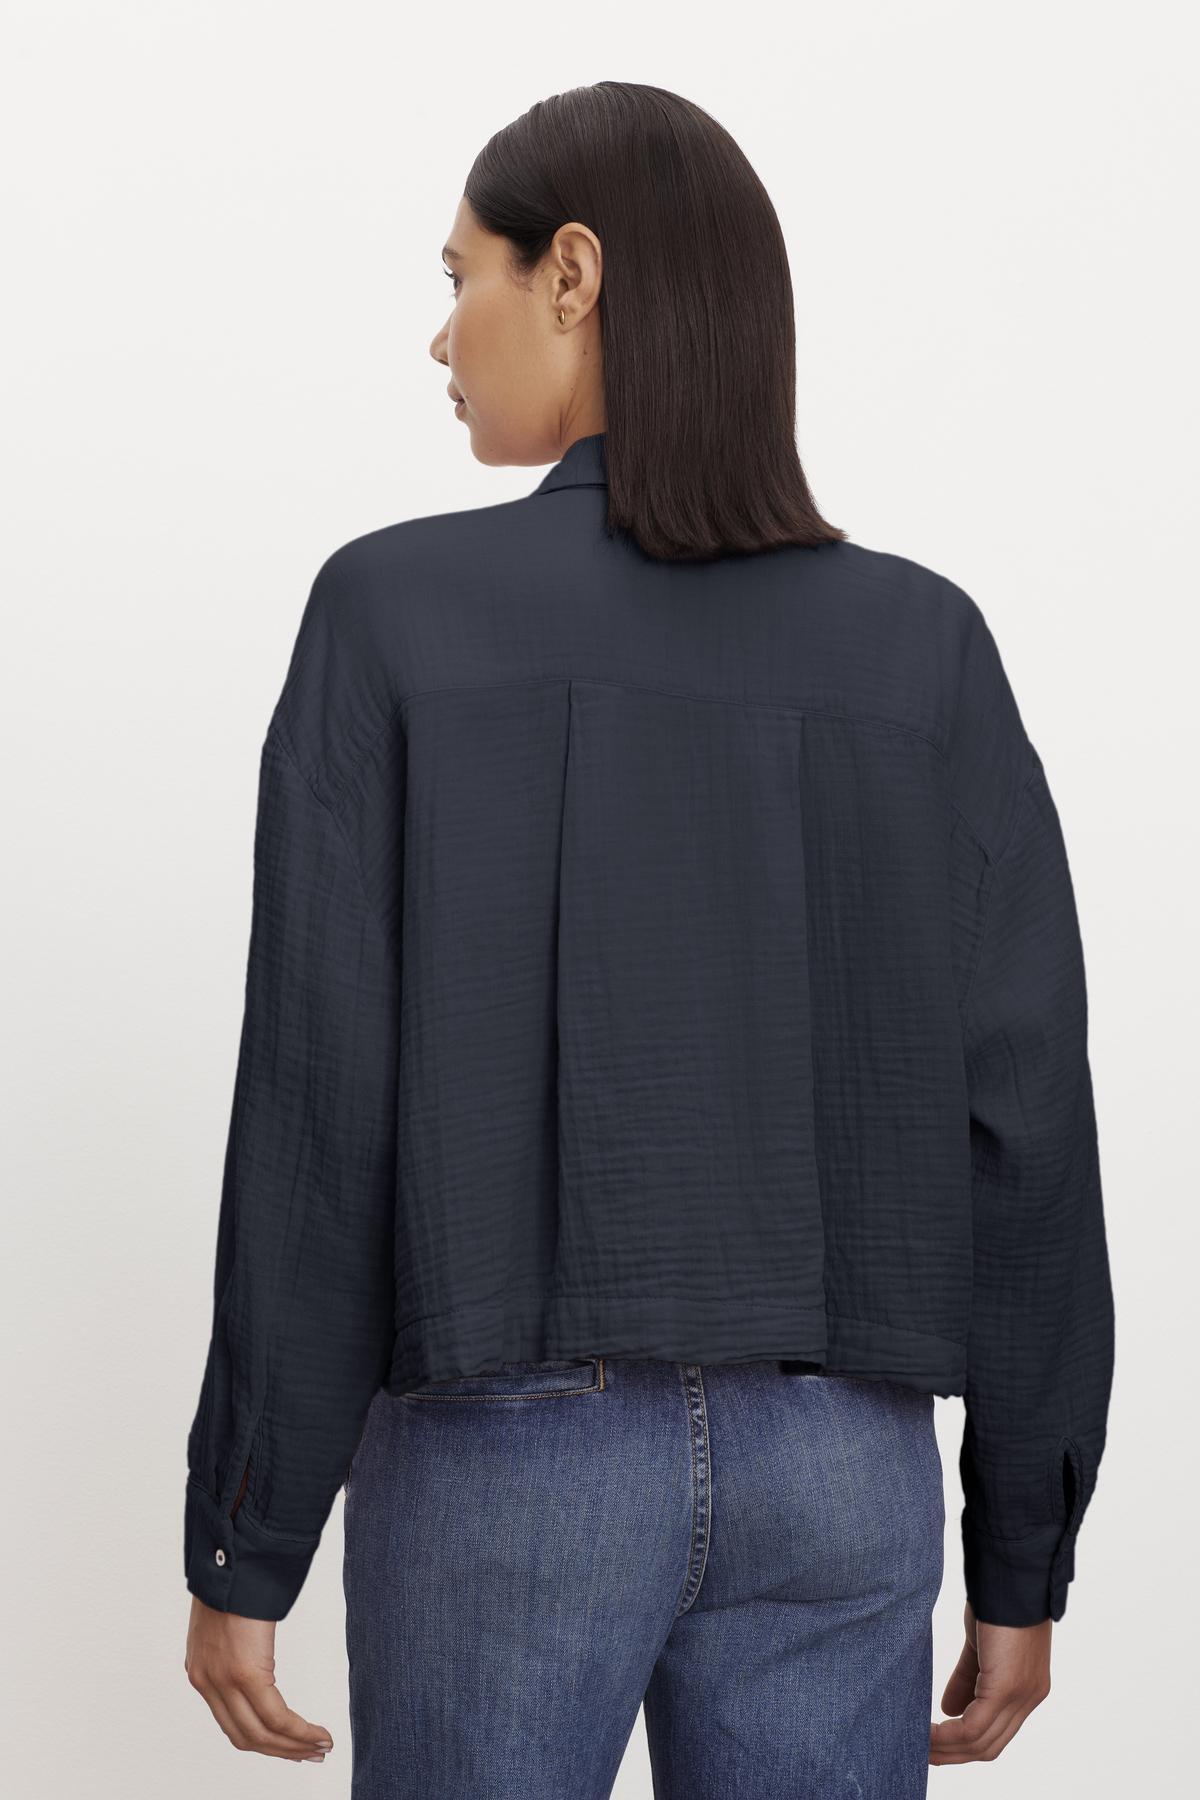 Woman in a cropped LANA COTTON GAUZE BUTTON-UP SHIRT blouse by Velvet by Graham & Spencer and blue jeans viewed from behind.-36462890287297